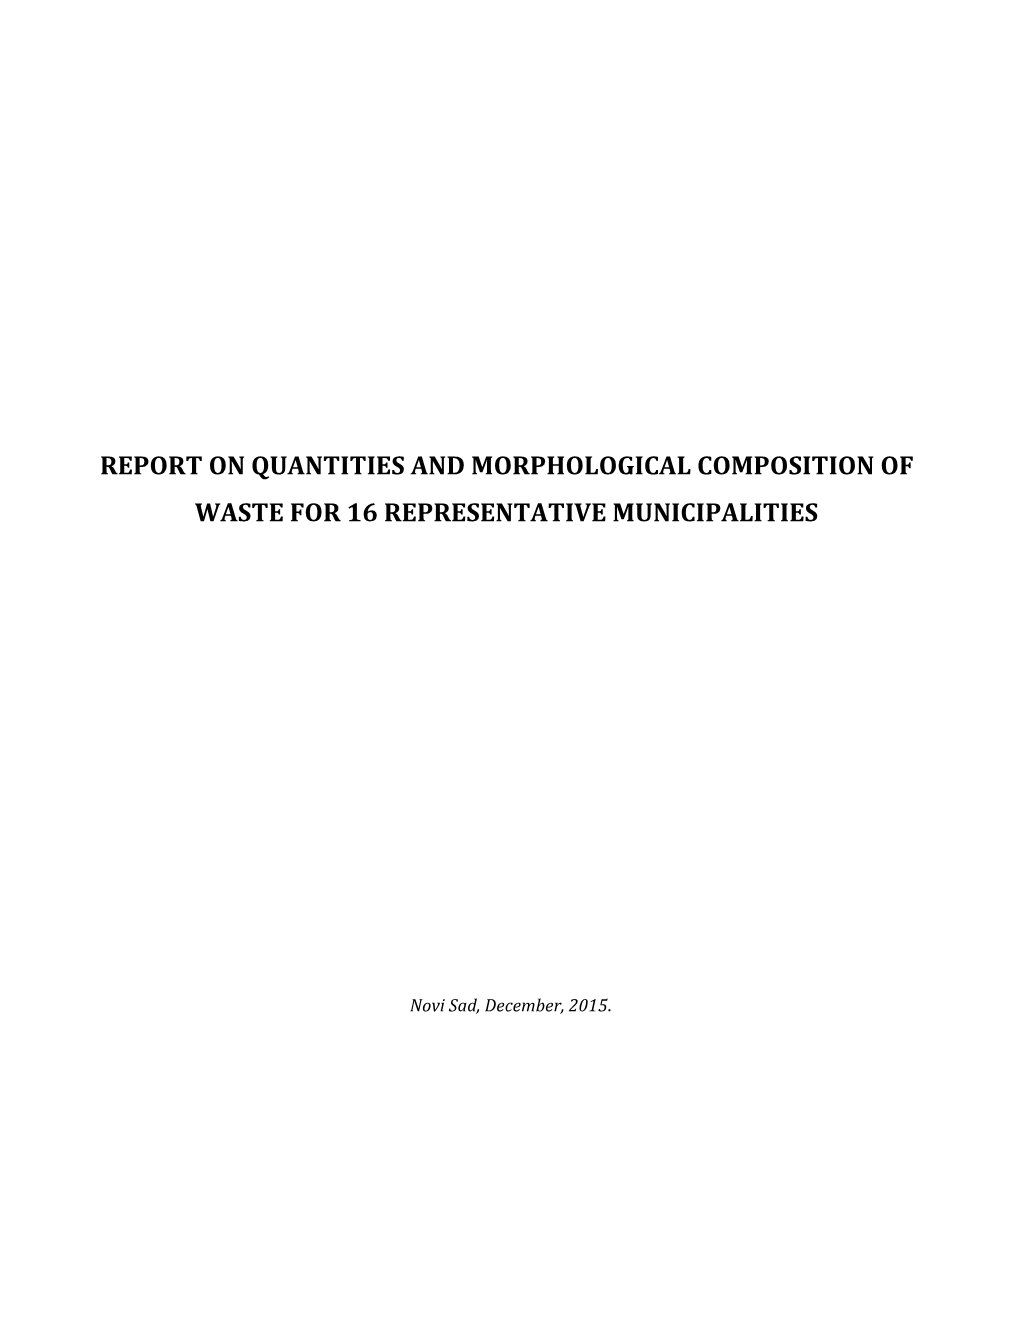 Report on Quantities and Morphological Composition of Waste for 16 Representative Municipalities